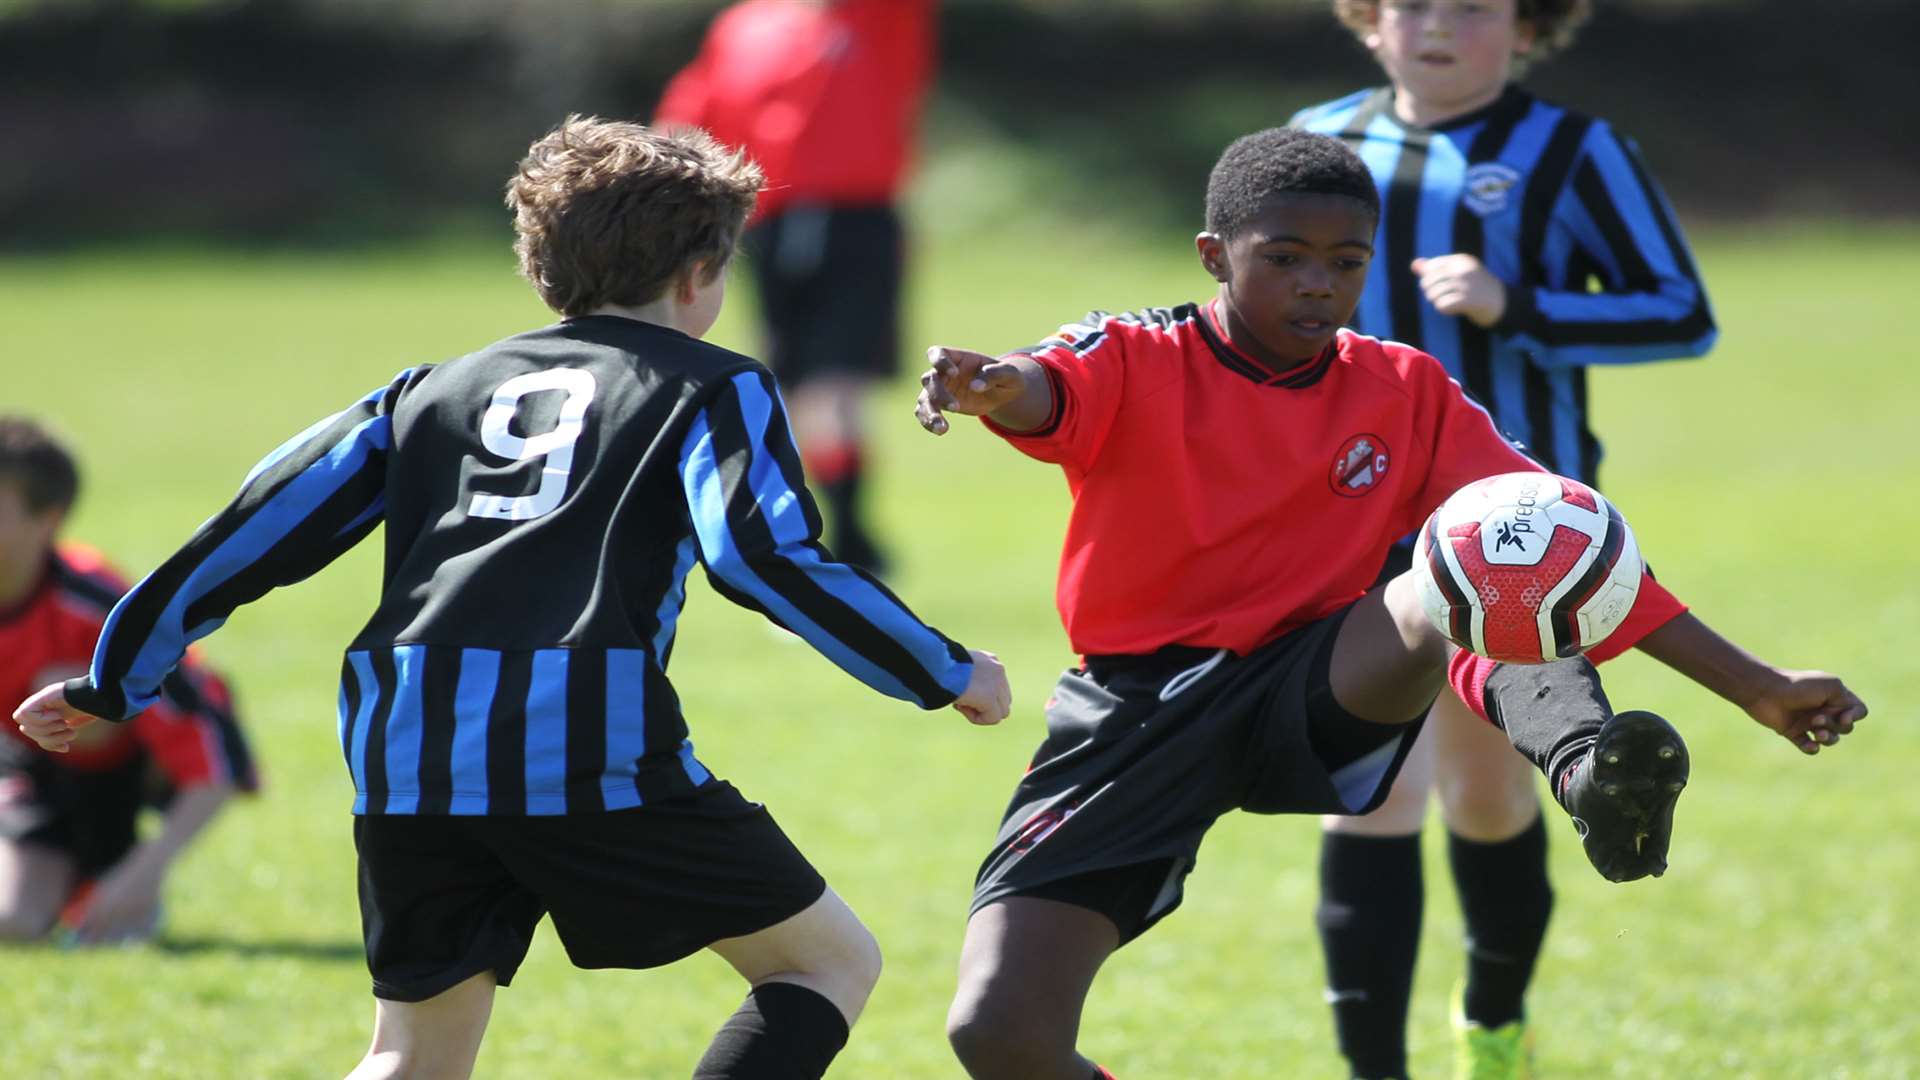 Rainham Kenilworth Colts under-11s, in red, show good close control against Fairview Rangers in Division 1 Picture: John Westhrop